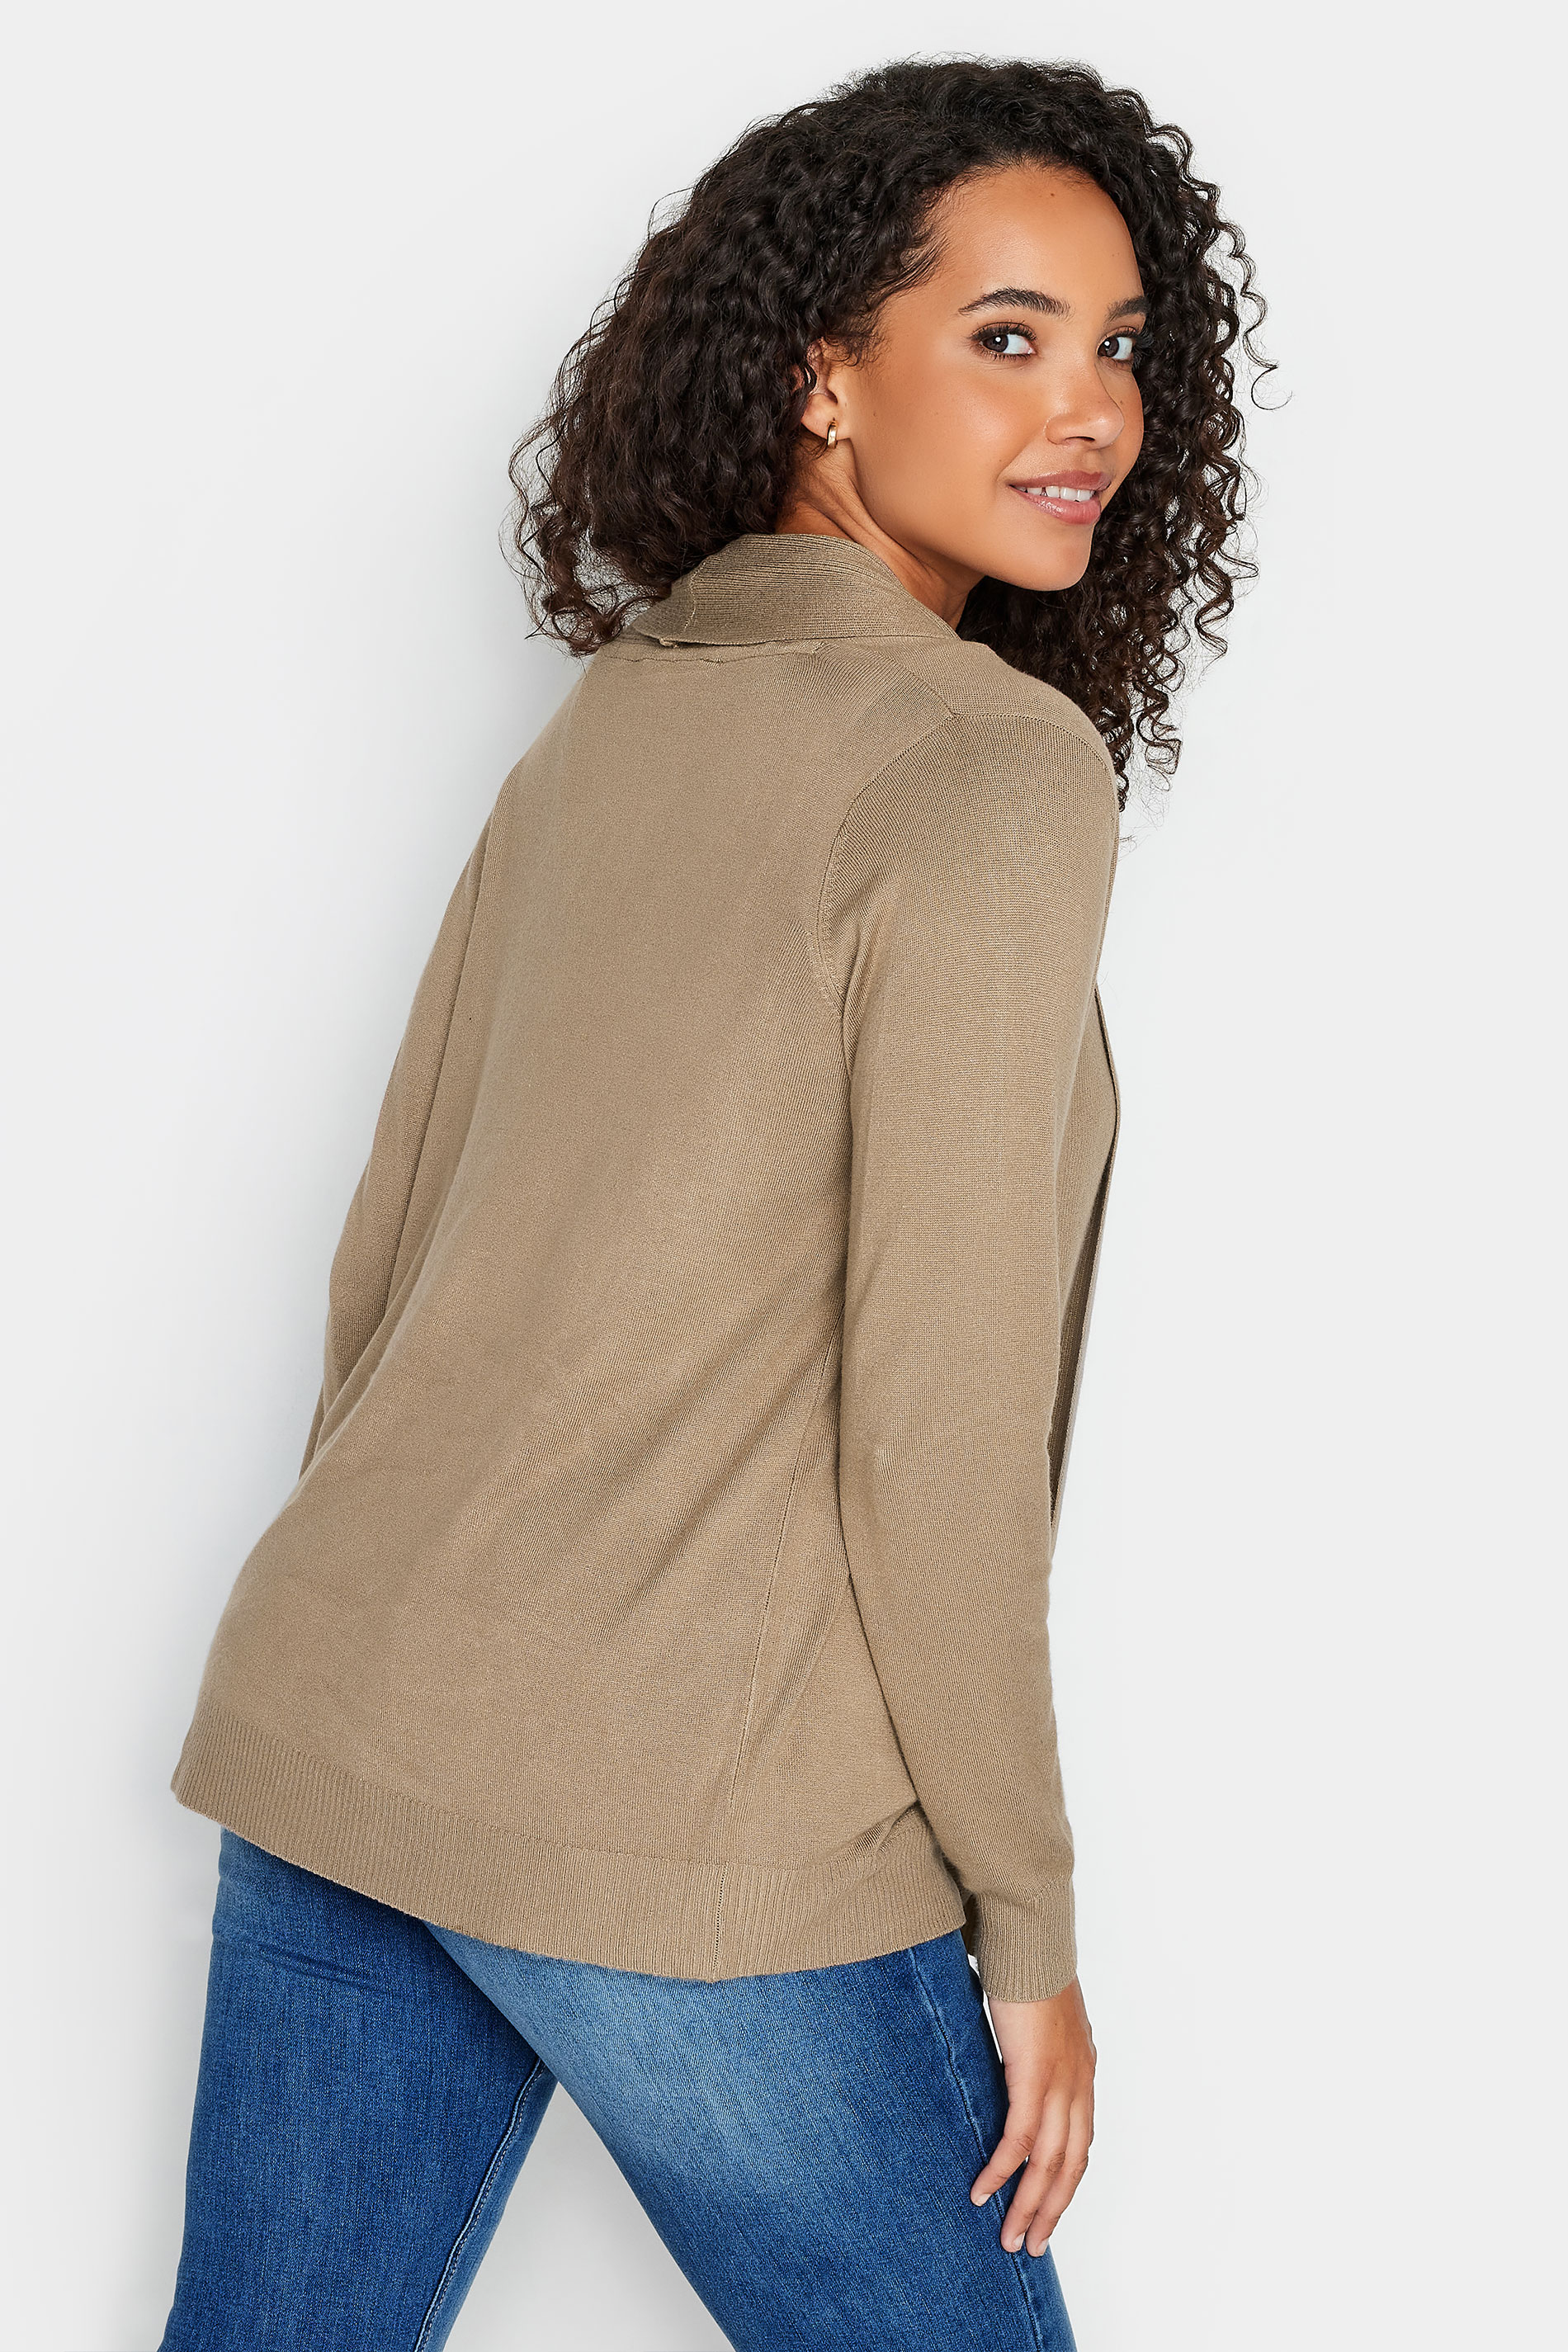 M&Co Camel Brown Long Sleeve Cardigan | M&Co 3